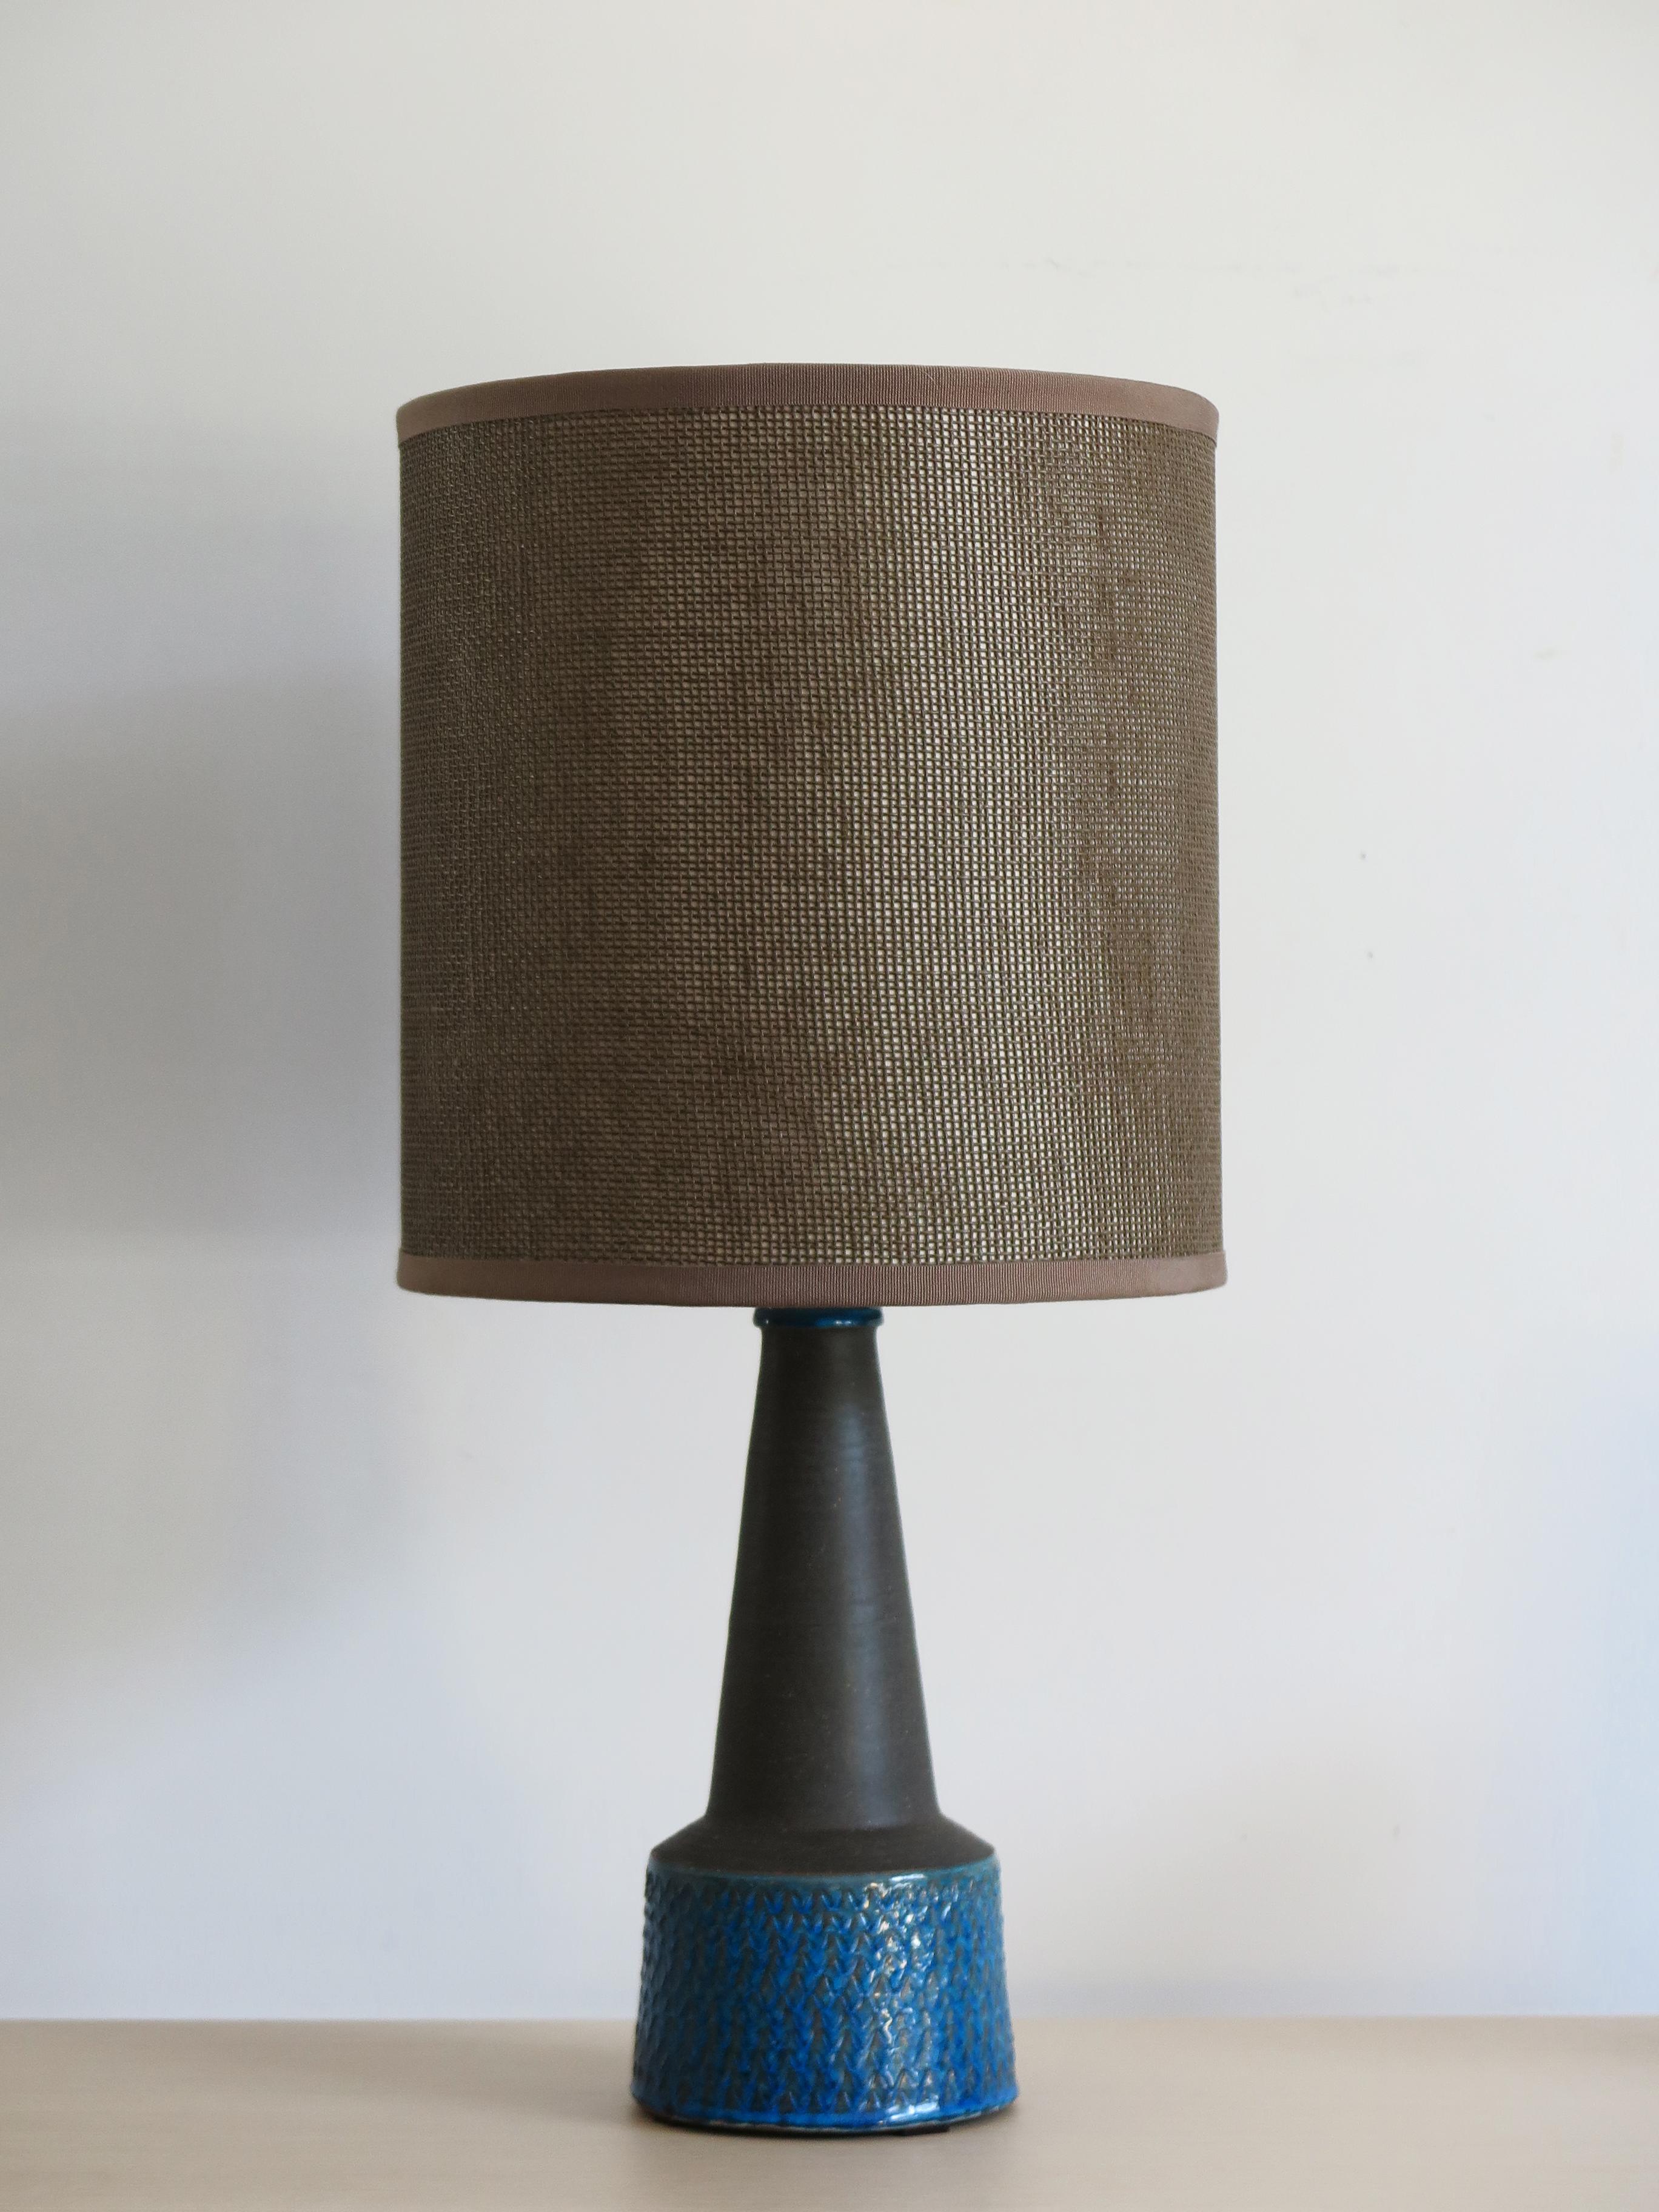 Midcentury Scandinavian table lamp lampshade with ceramic base designed by Nils Kähler for Kähler Hak and with lampshade remade in new cotton fabric, Denmarc 1950s.

Please note that the lamp is original of the period and this shows normal signs